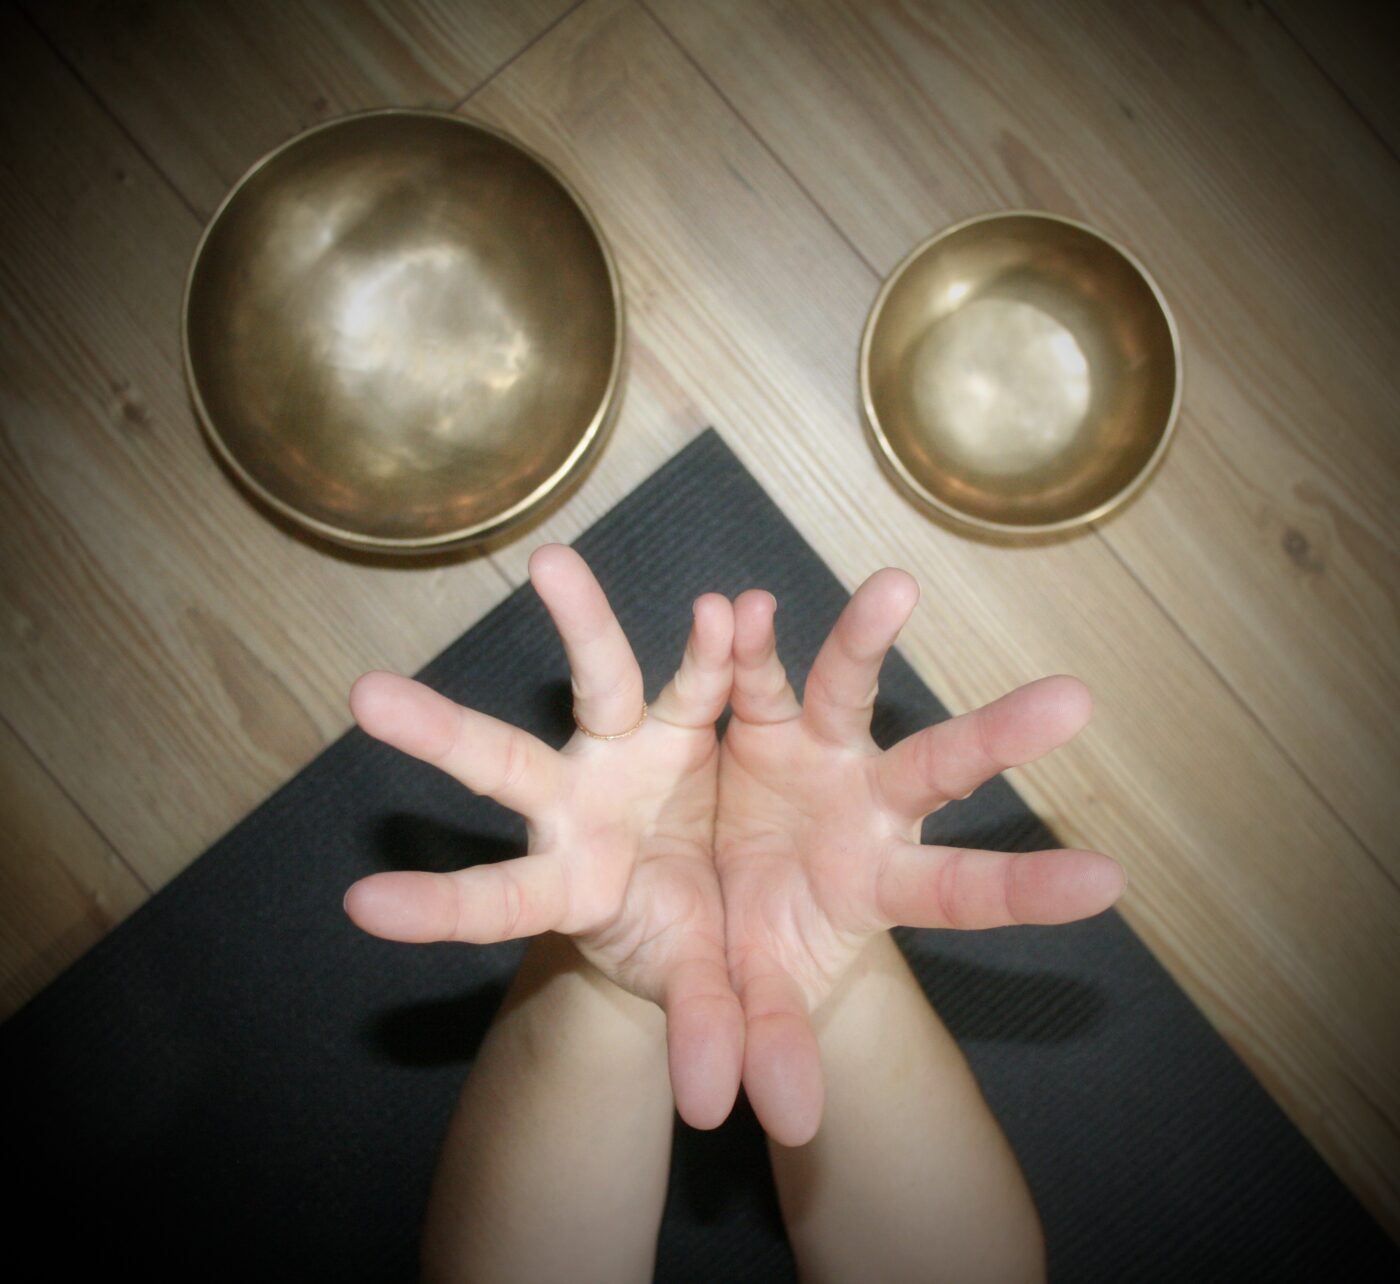 Hands are reaching directly up to the camera, with a yoga mat and two Tibetan singing bowls shown on the floor below